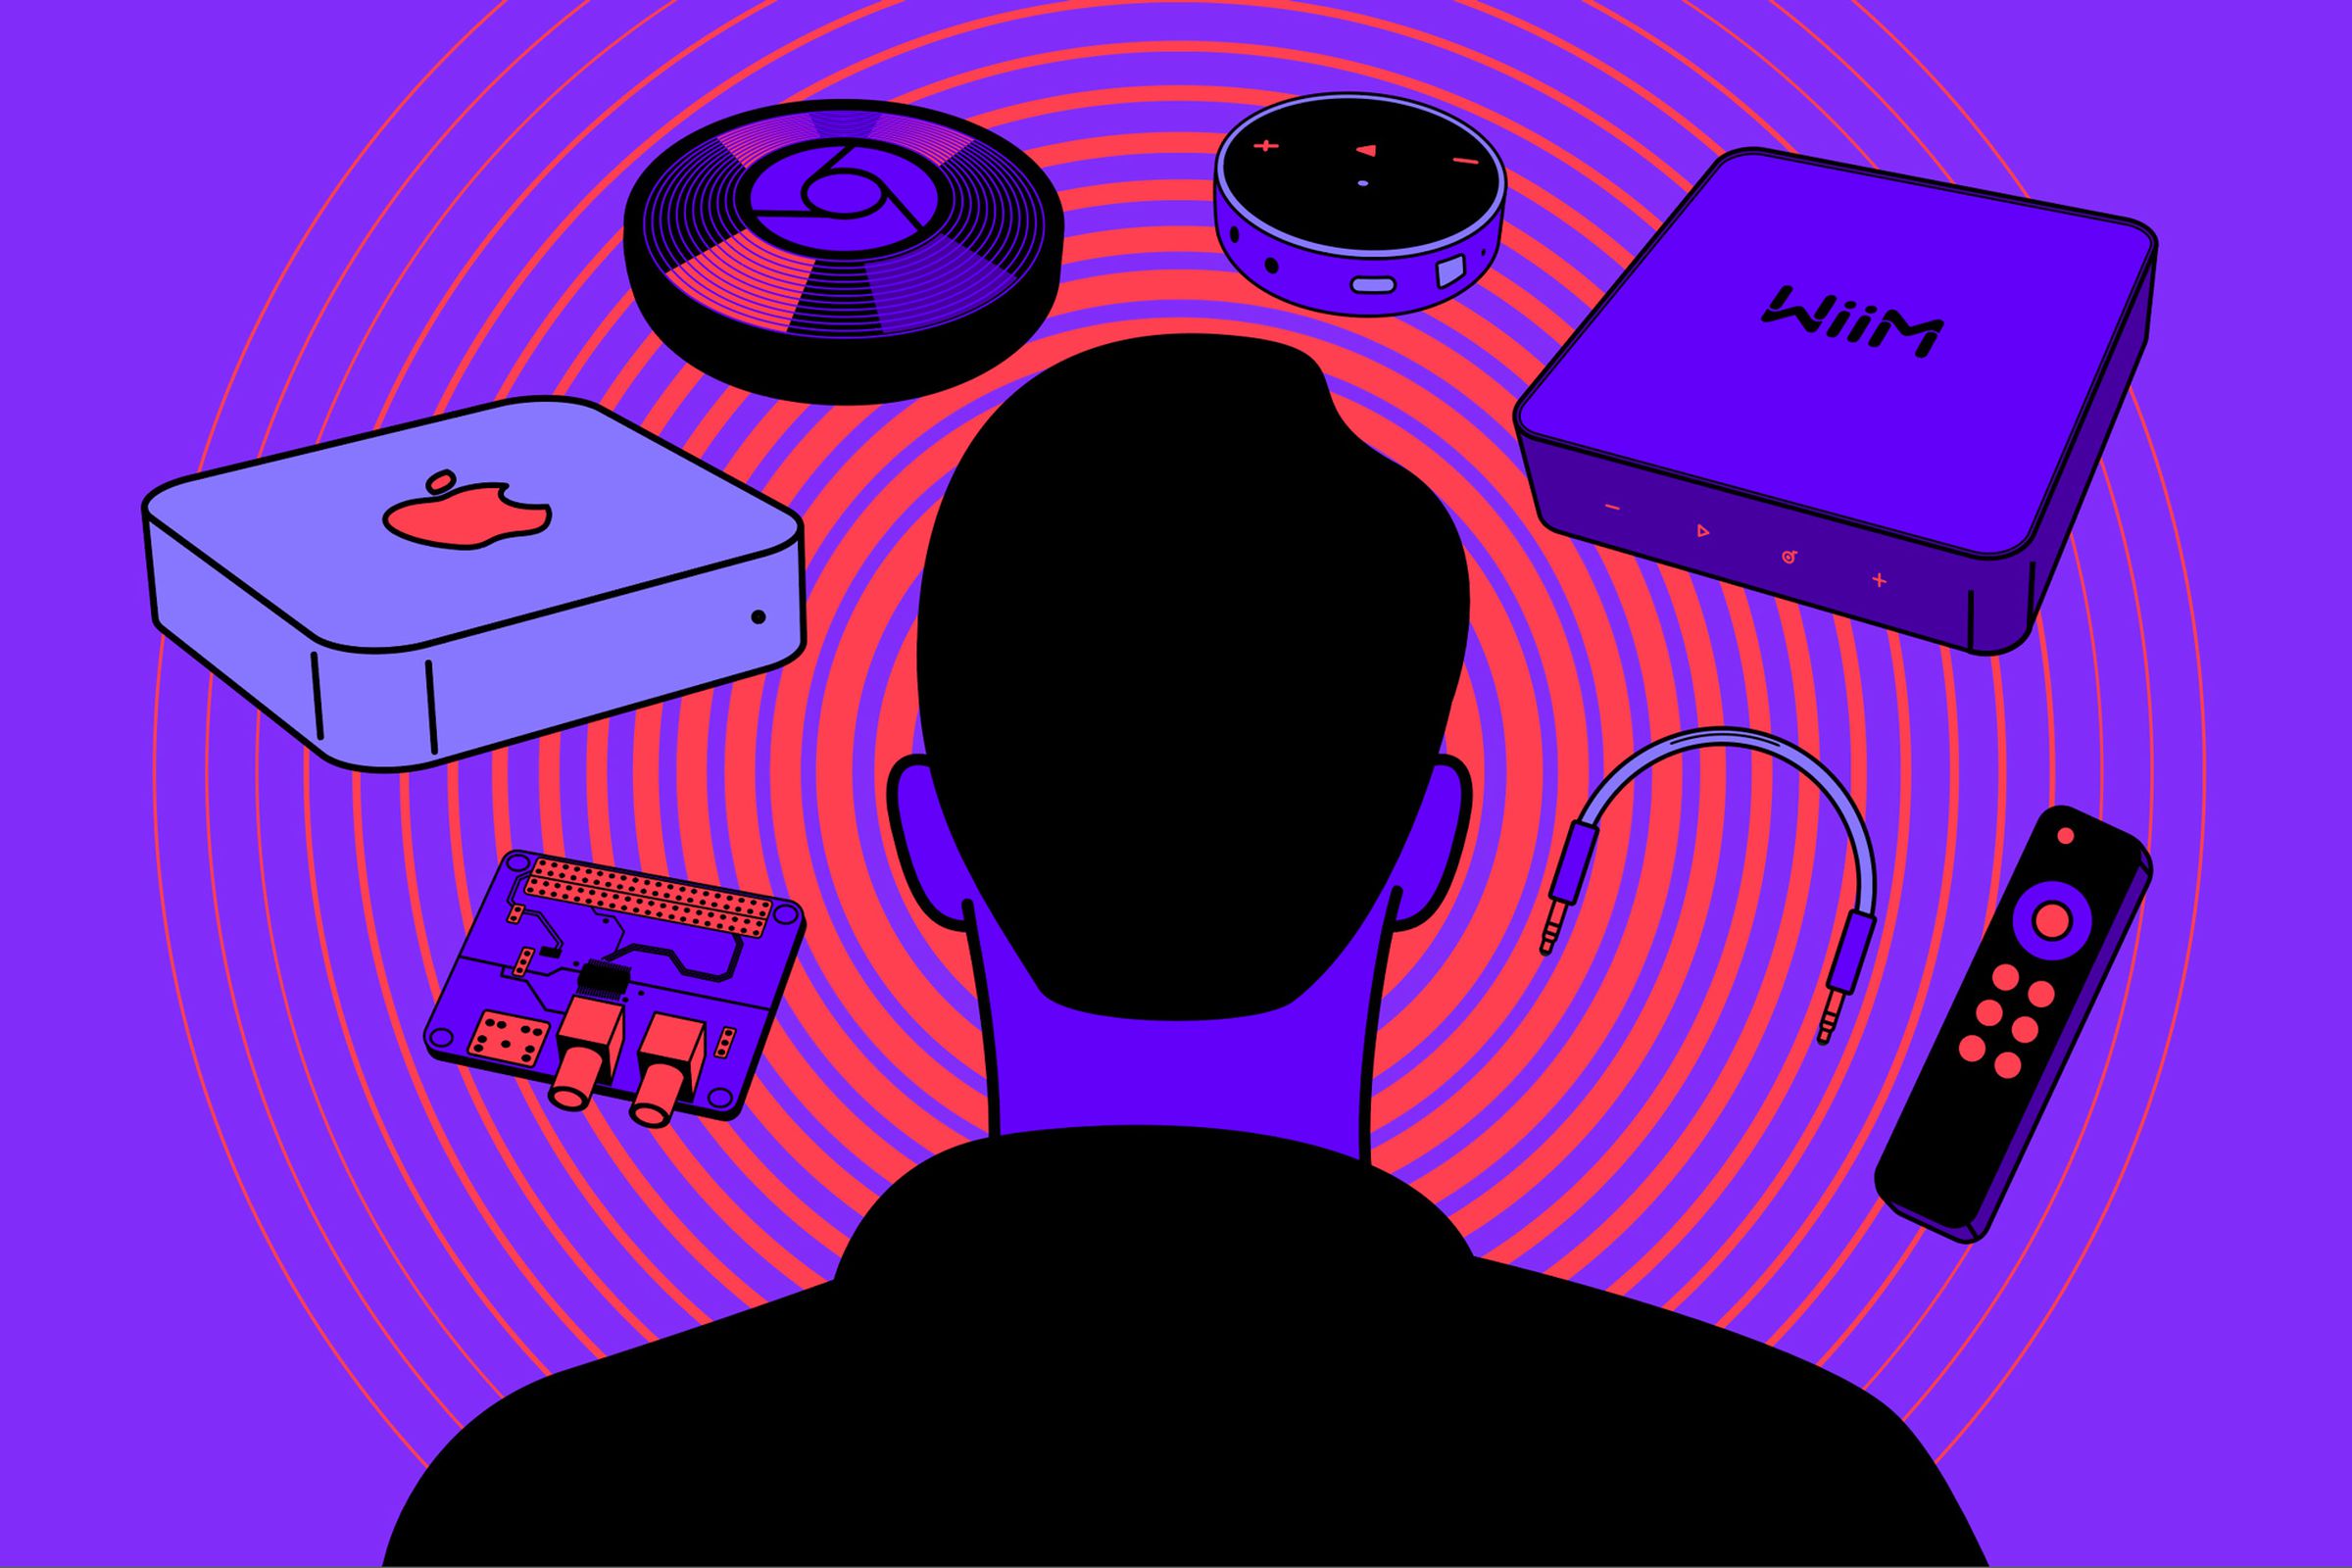 An illustration of many different streaming devices and a person’s head looking at them.